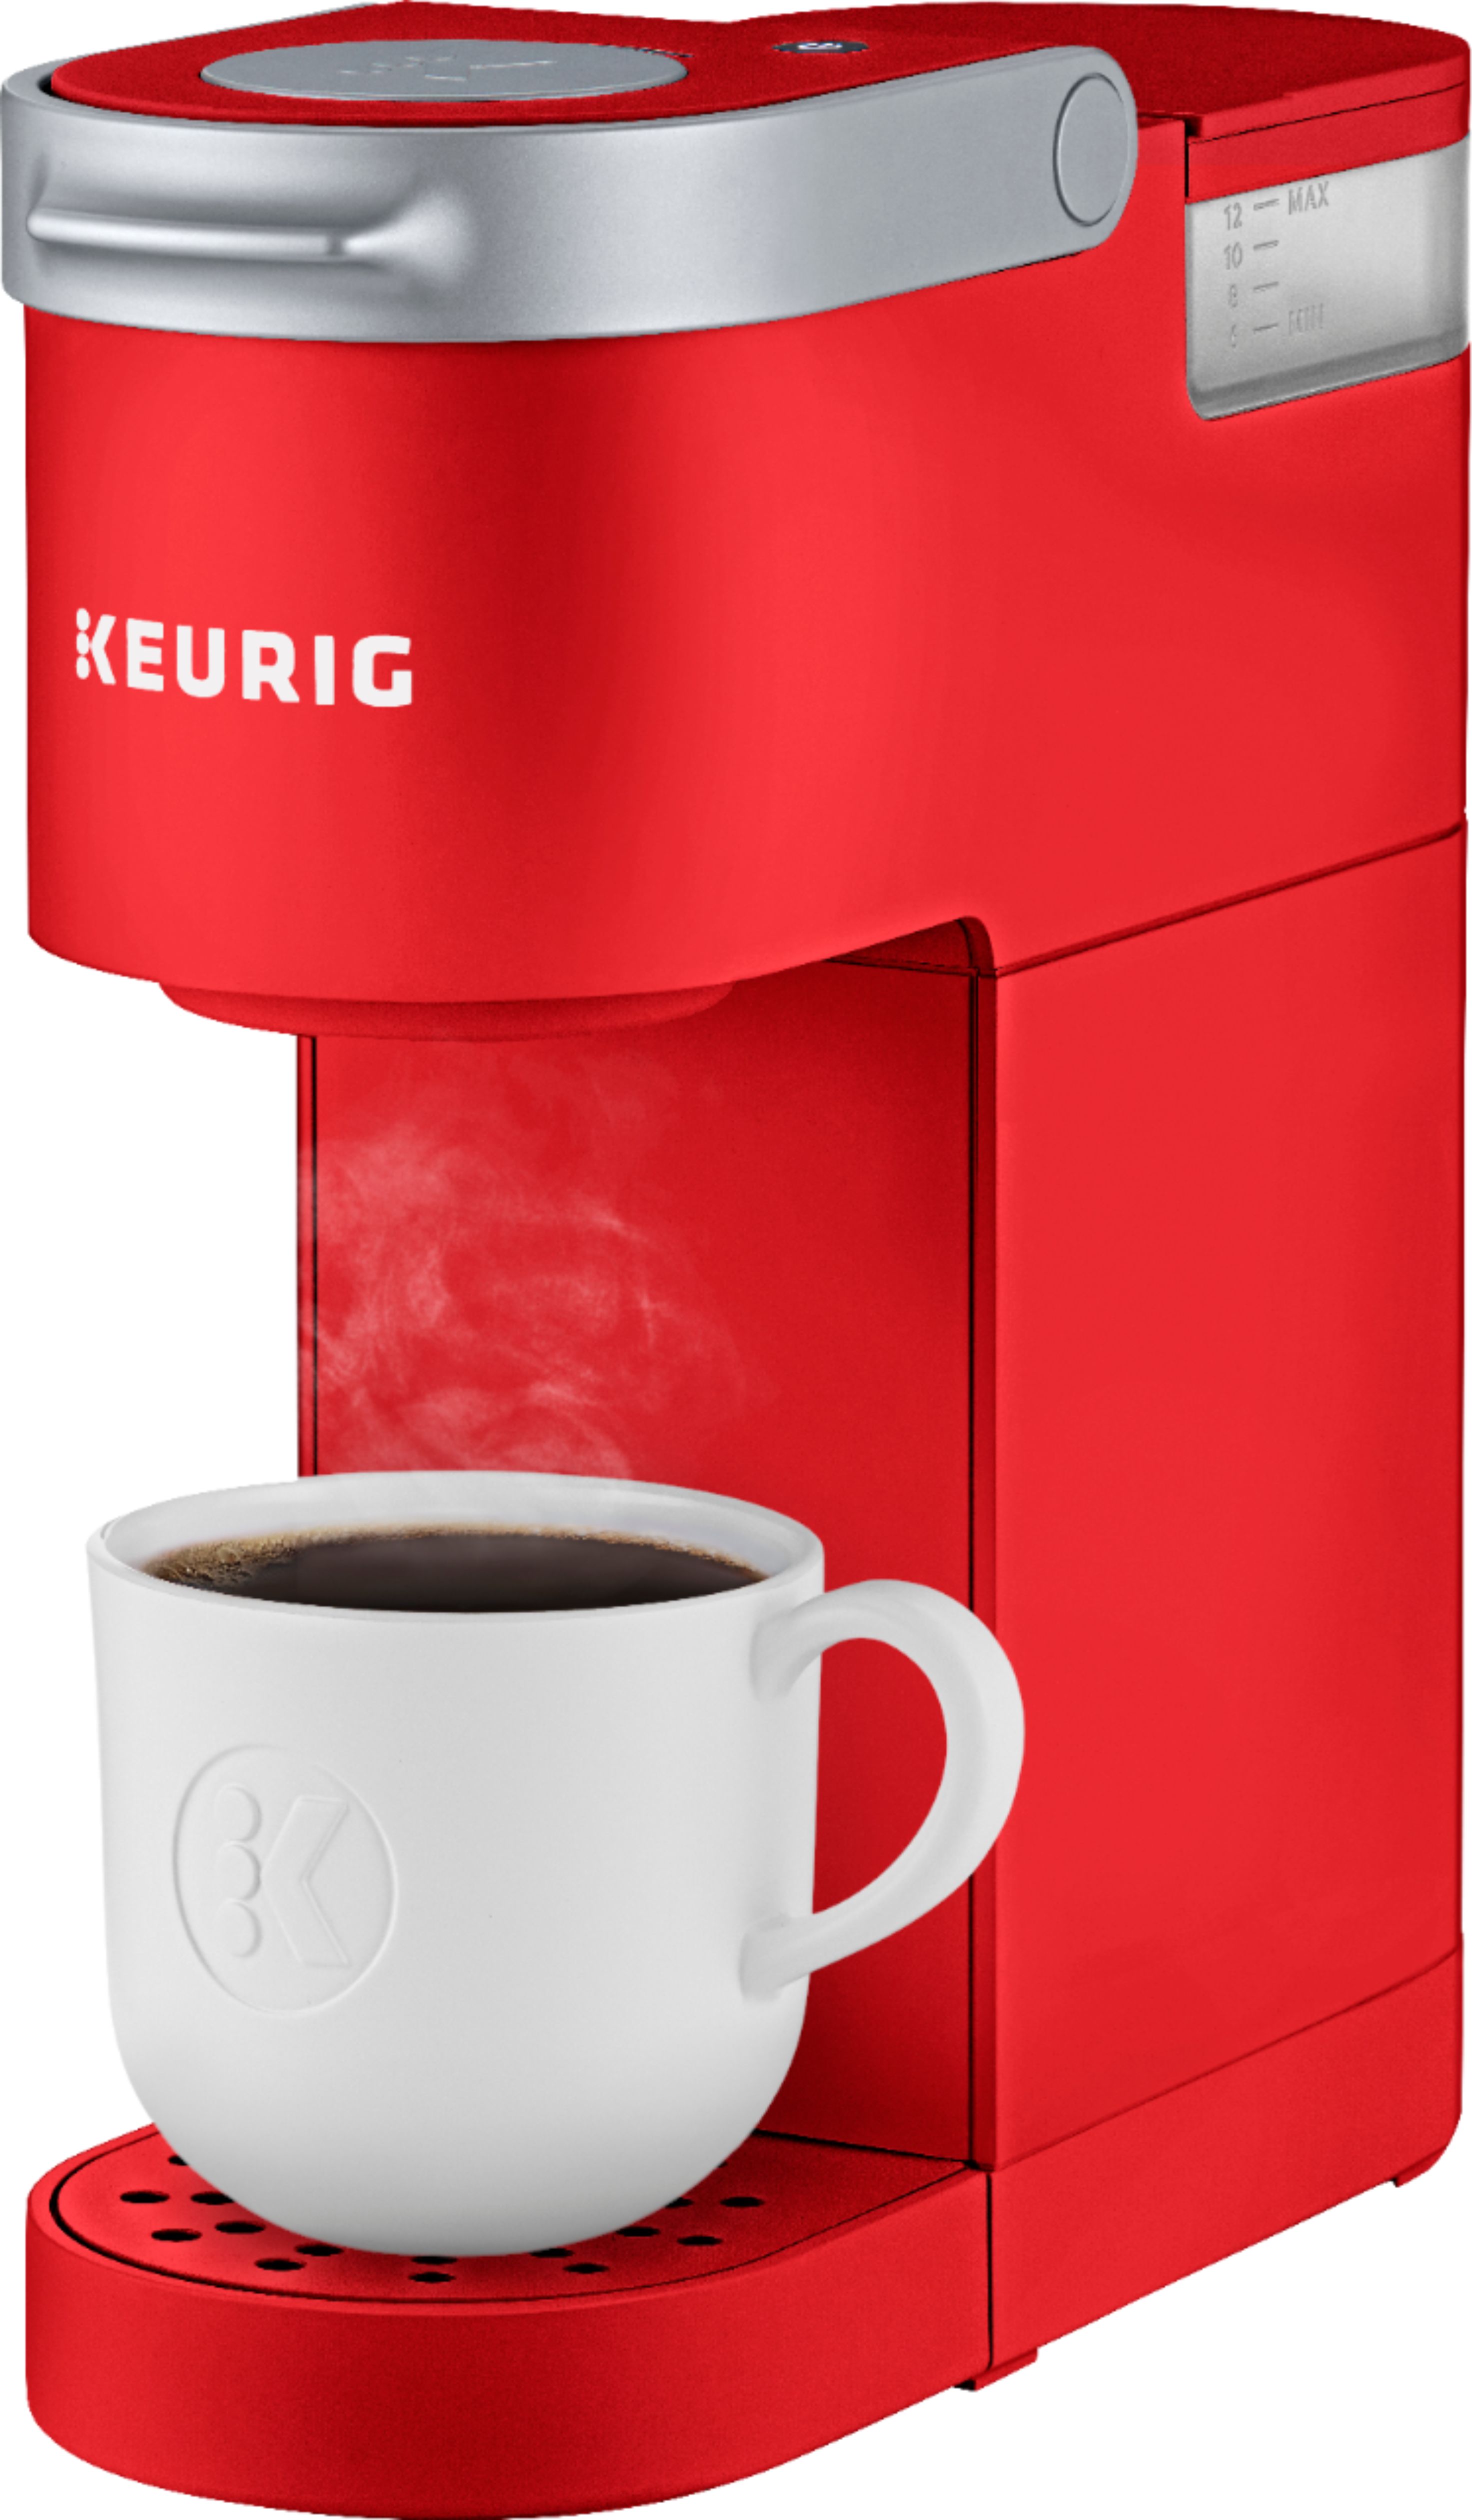 Keurig RNAB0BMJCHWHZ keurig k-mini coffee maker single-serve k-cup (poppy  red) bundle with 3-month brewer maintenance kit and double wall stainles